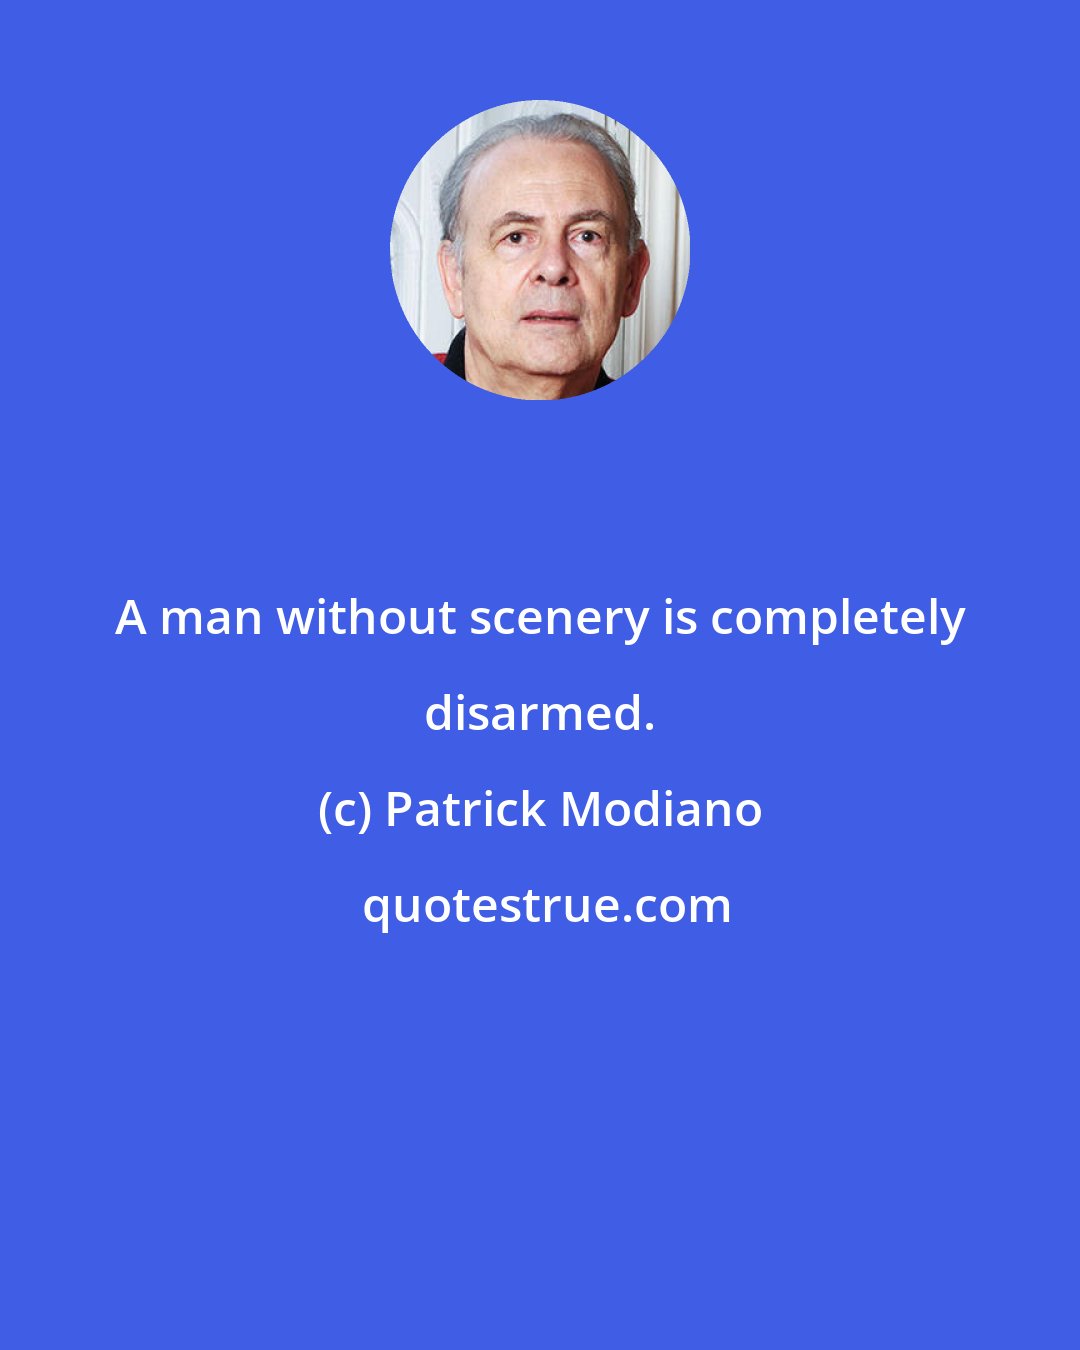 Patrick Modiano: A man without scenery is completely disarmed.